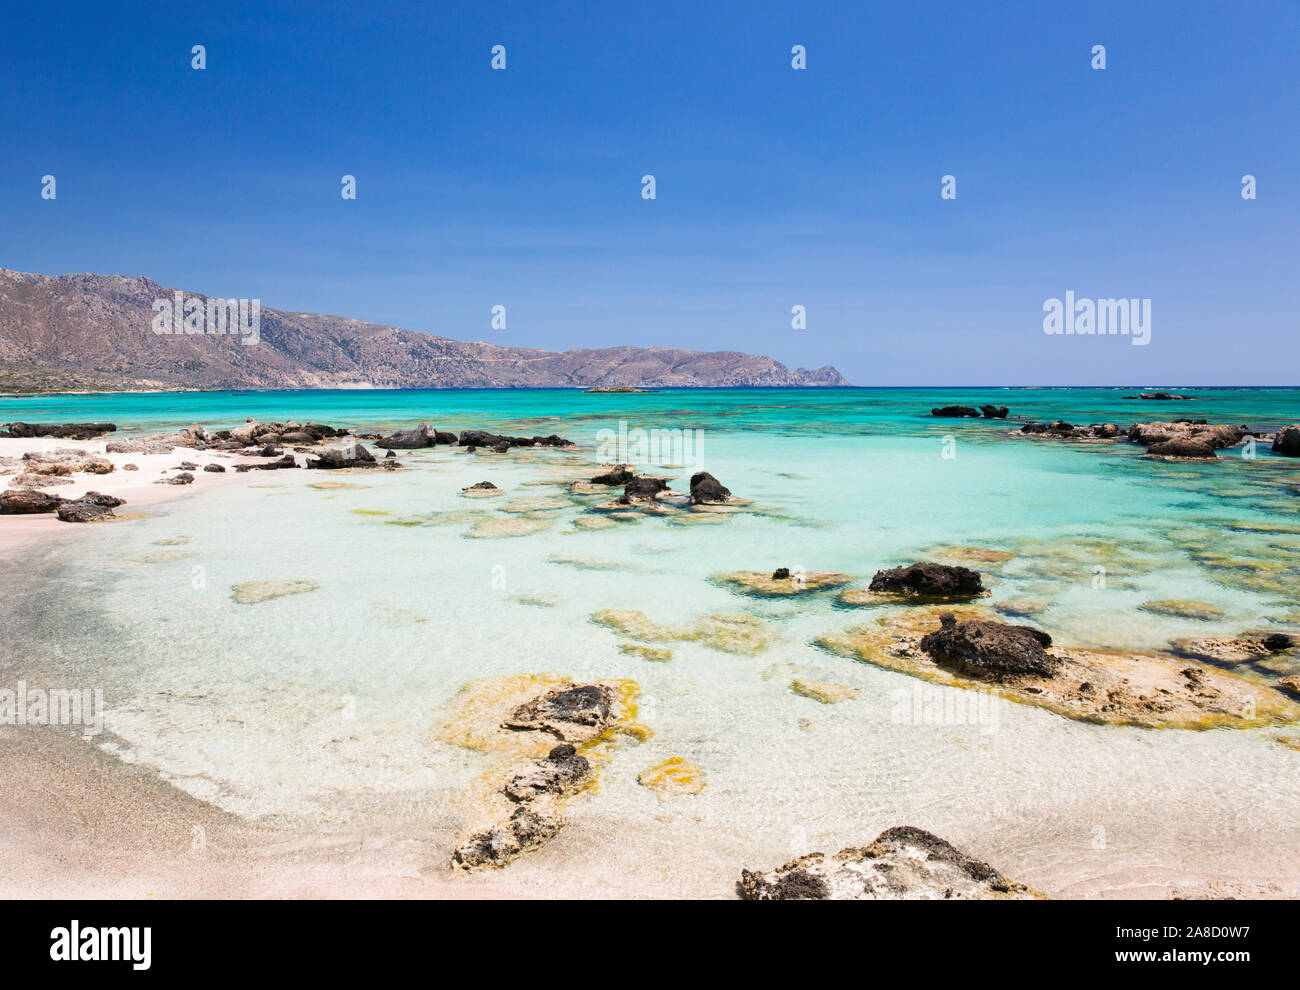 Elafonisi, Chania, Crete, Greece. View from beach across the clear turquoise waters of Vroulia Bay. Stock Photo